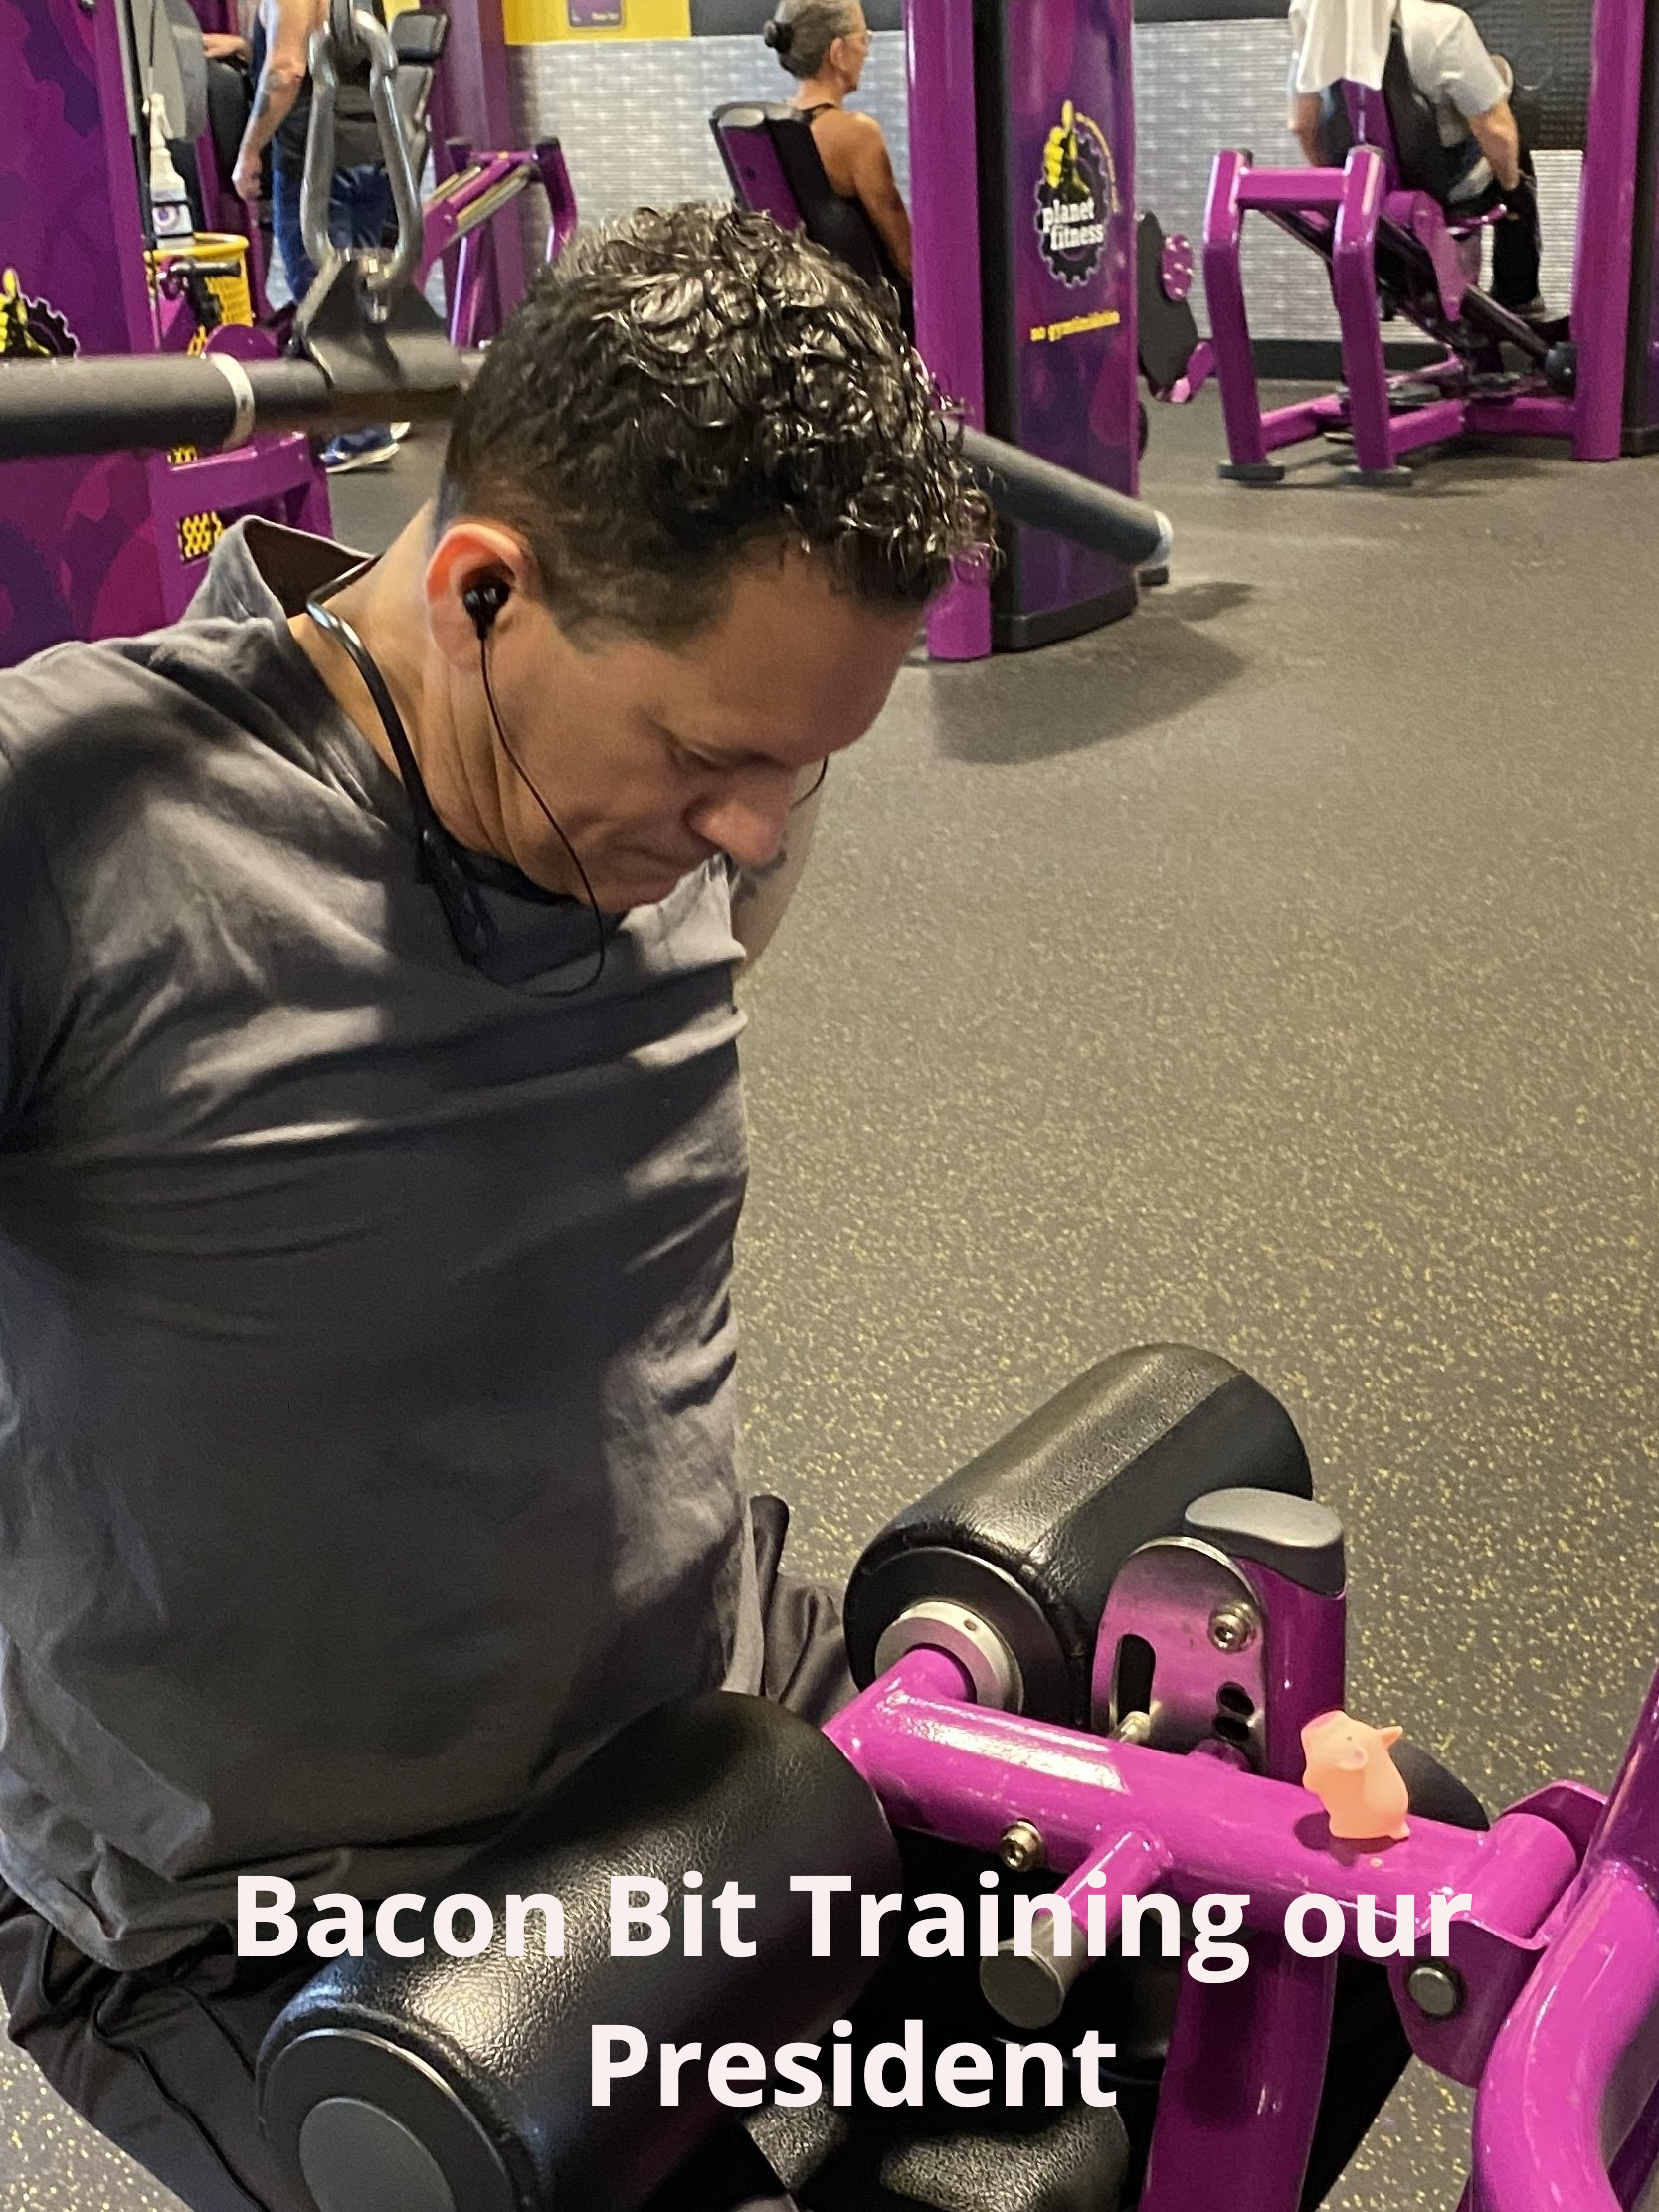 Bacon Bit Training our President